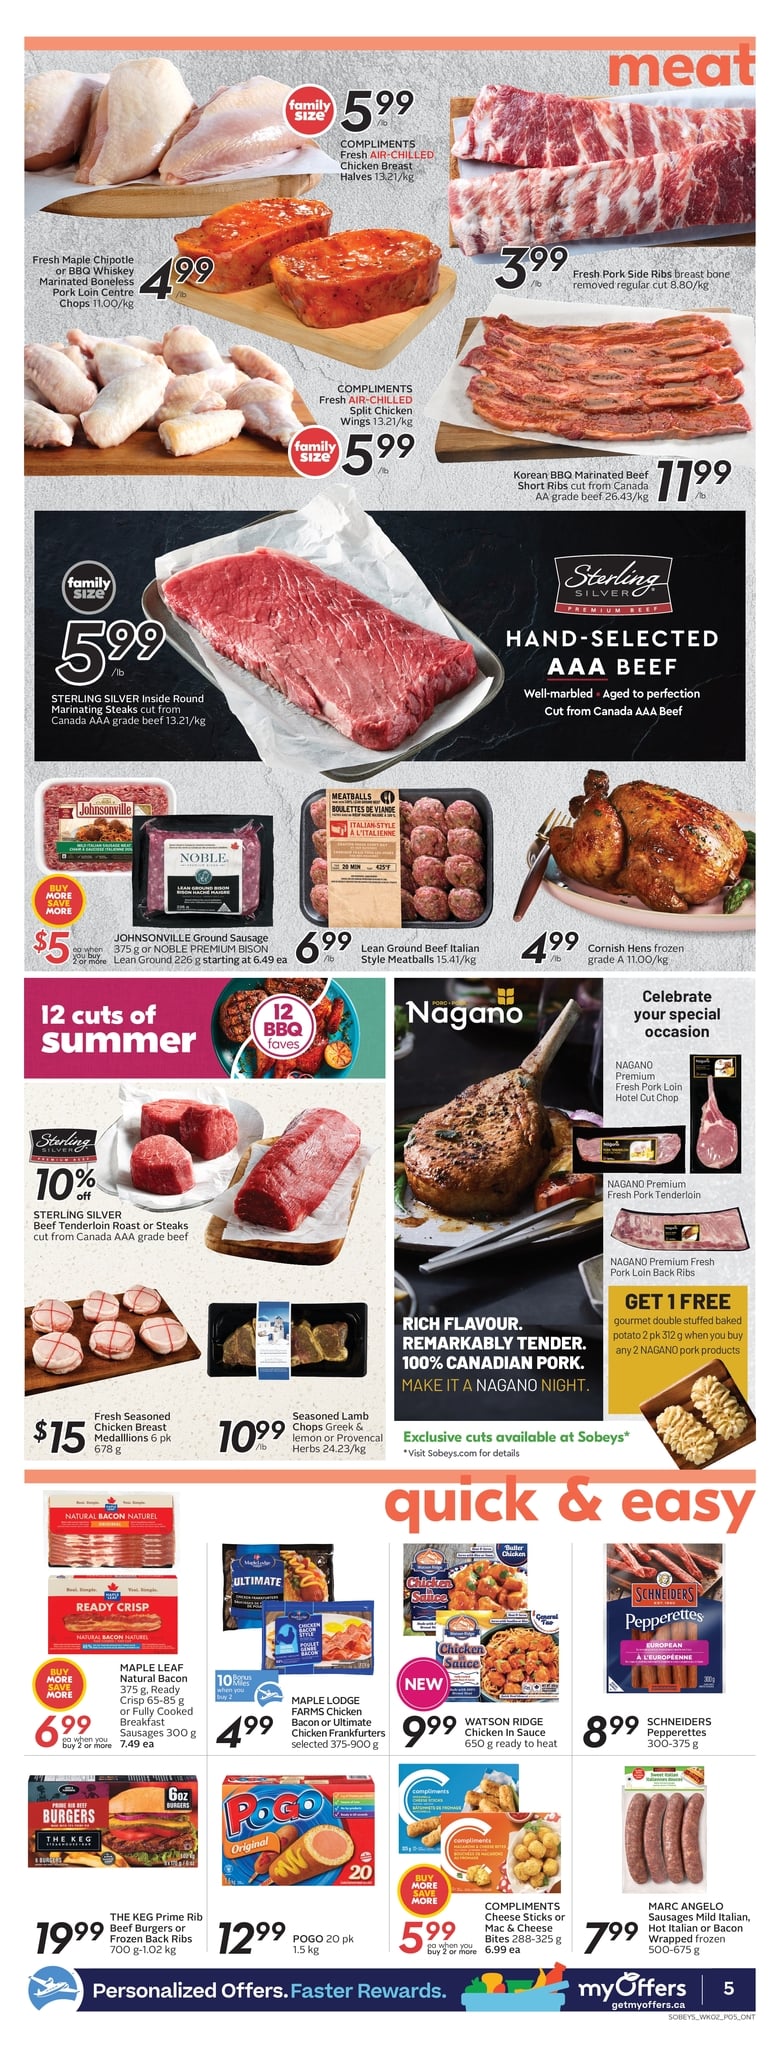 Sobeys - Weekly Flyer Specials - Page 7